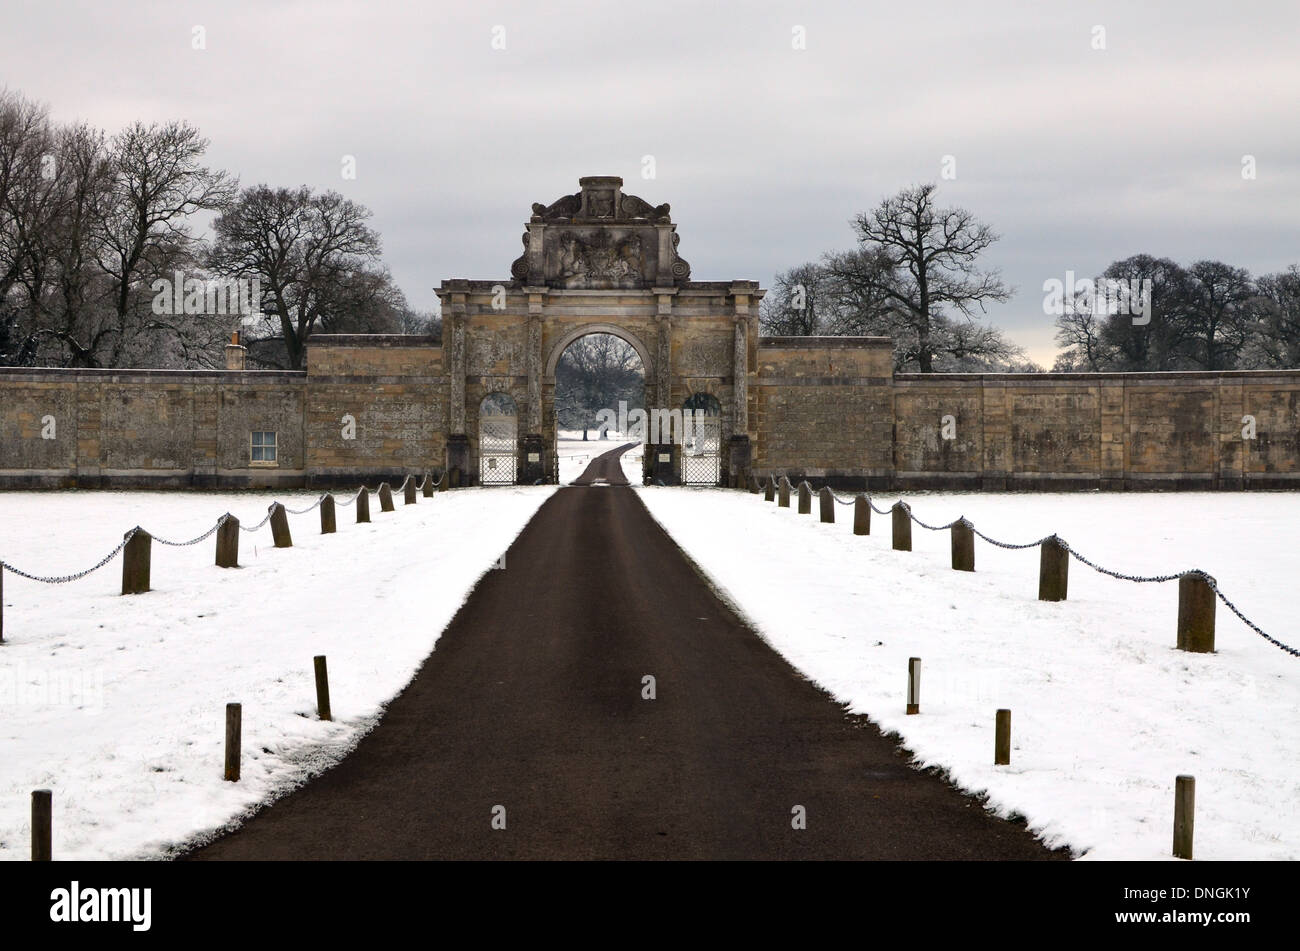 Entrance to Paris House, Woburn Park and the Duke of Bedford's Estate in the snow Stock Photo